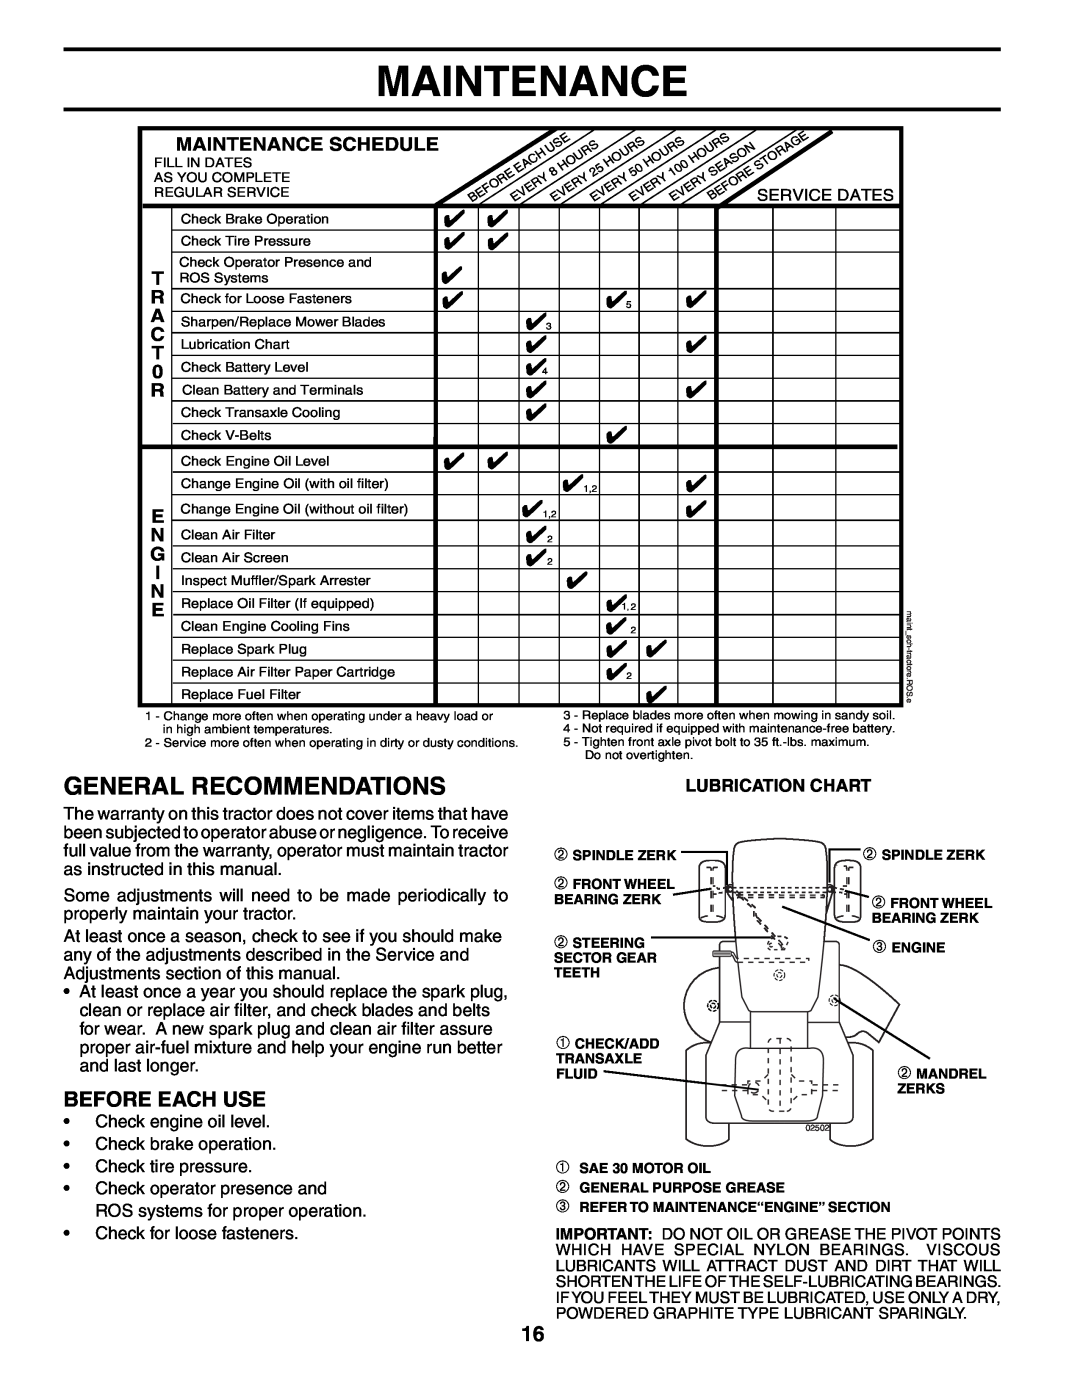 Husqvarna GT2254 owner manual General Recommendations, Before Each Use, Maintenance Schedule, Lubrication Chart 